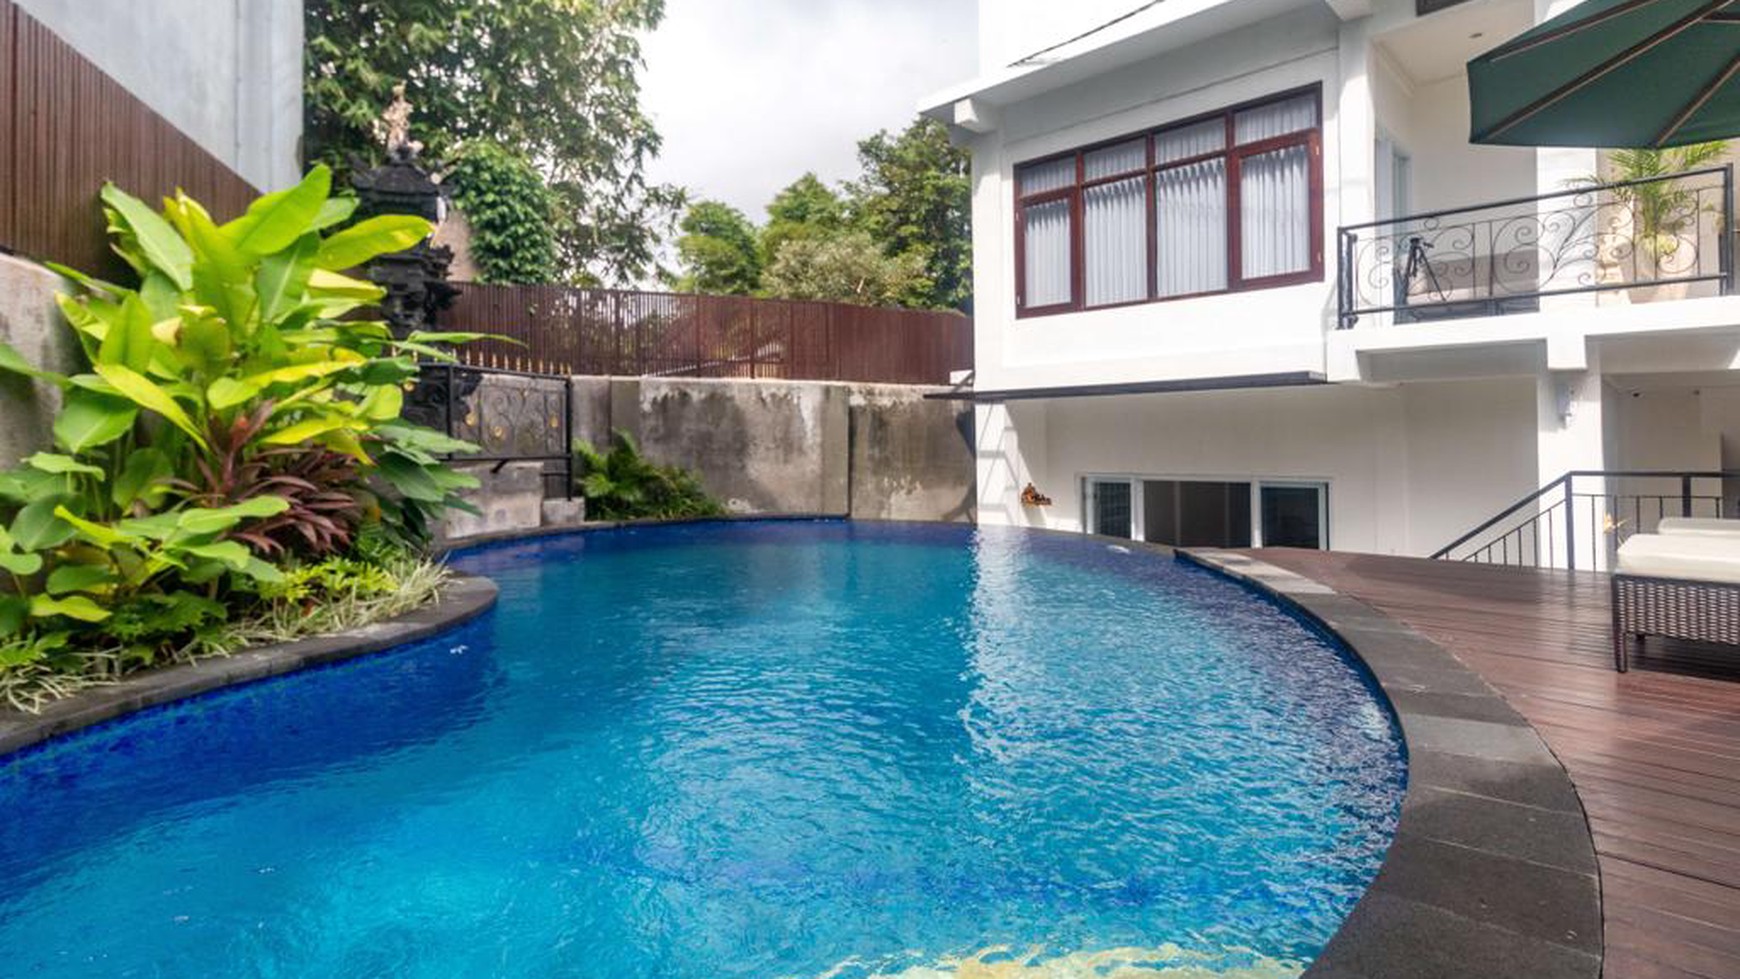 1 Bedroom Apartment with Beautiful View For Rent just 5 Minutes from Ubud Center